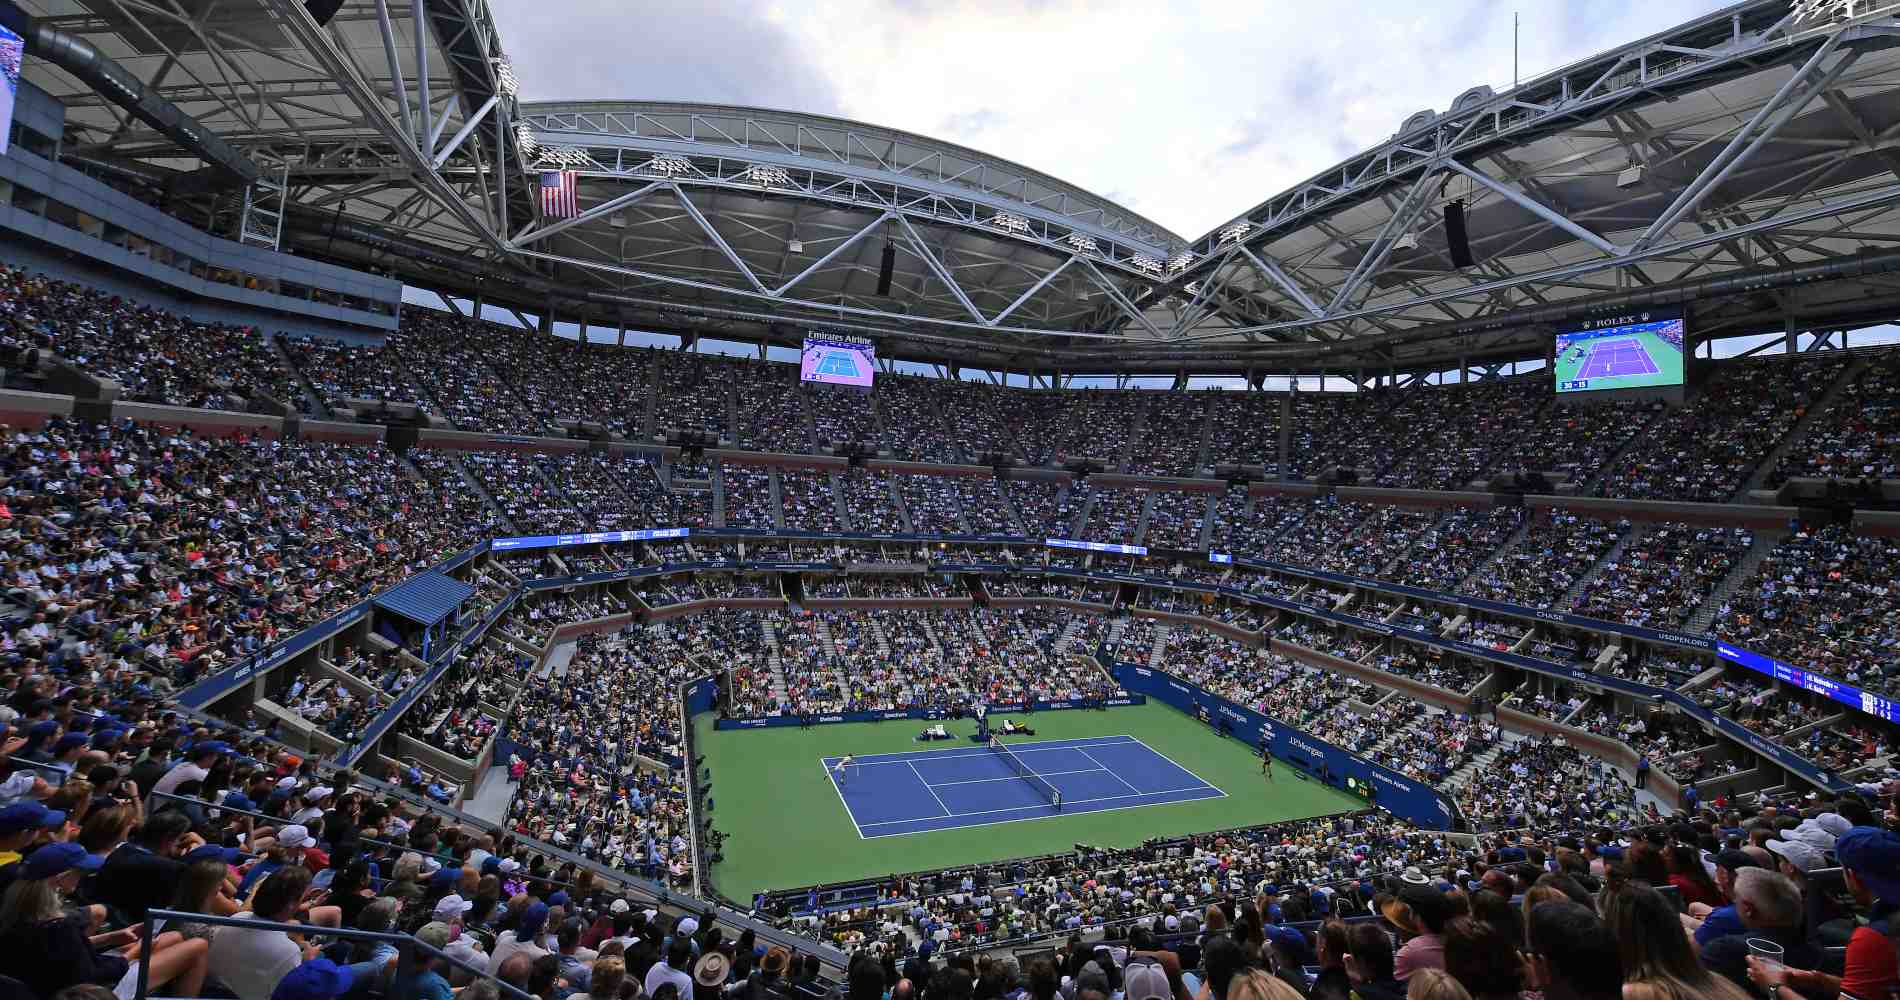 US Open 2021 Prize money: Players to get lowest payout since 2012- check round-wise prize money details